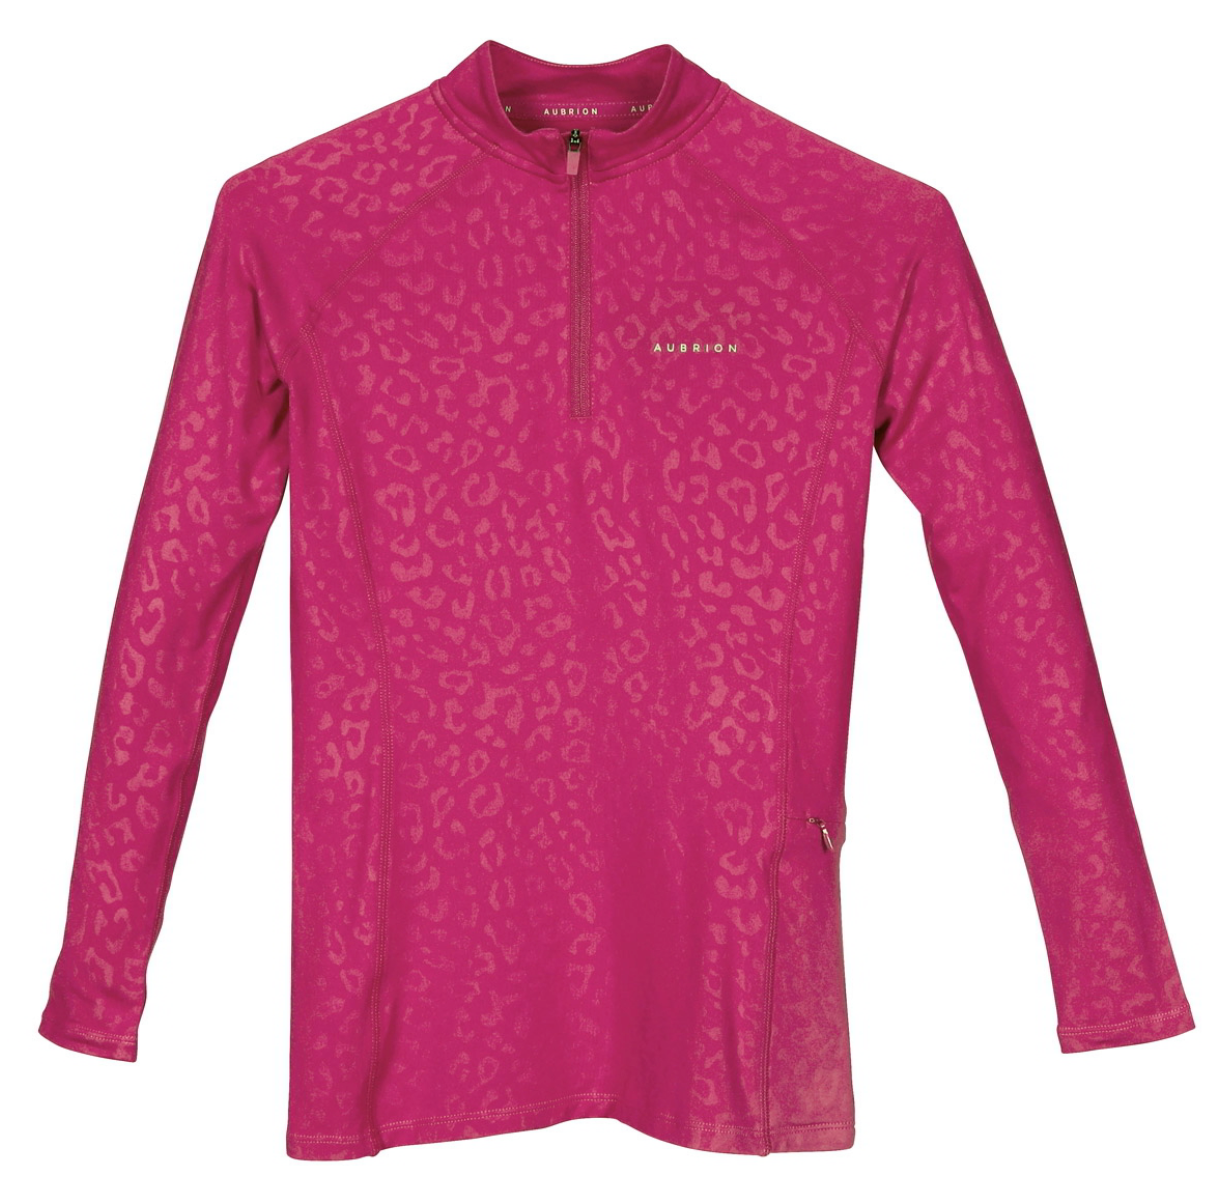 Aubrion Young Rider Revive Long Sleeve Base Layer - Cerise